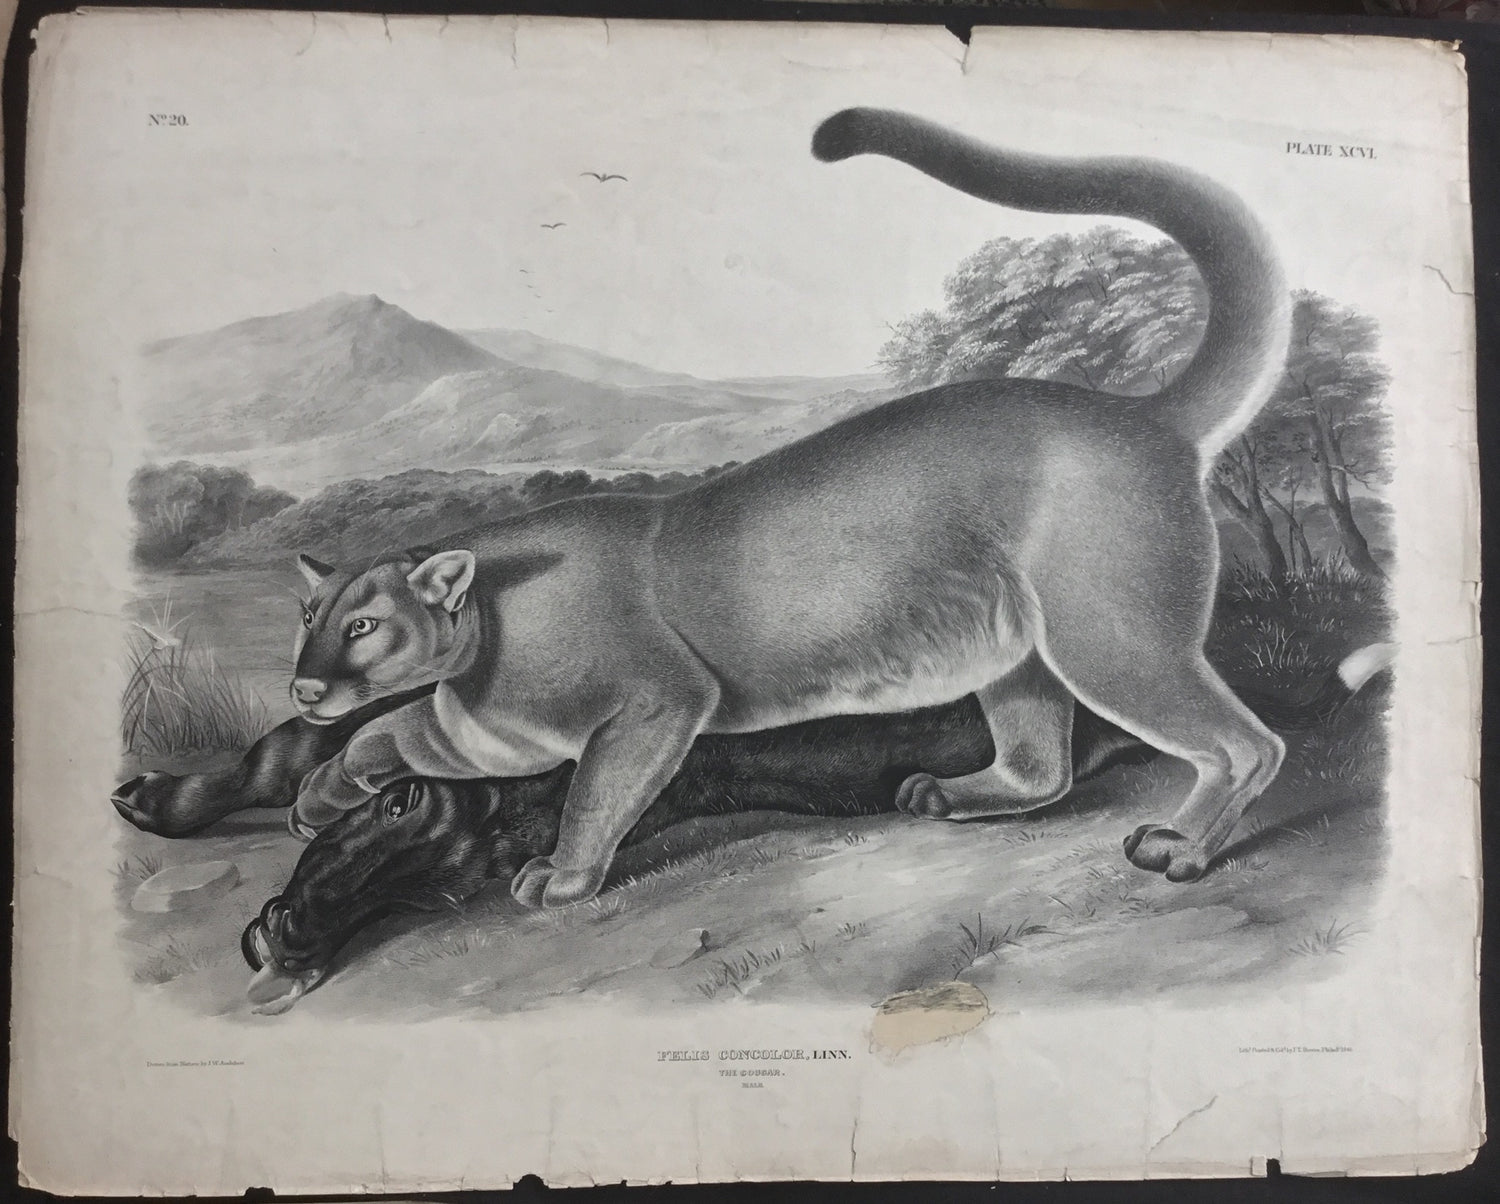 Lord-Hopkins Collection, Audubon Original Imperial plate 96, The Cougar